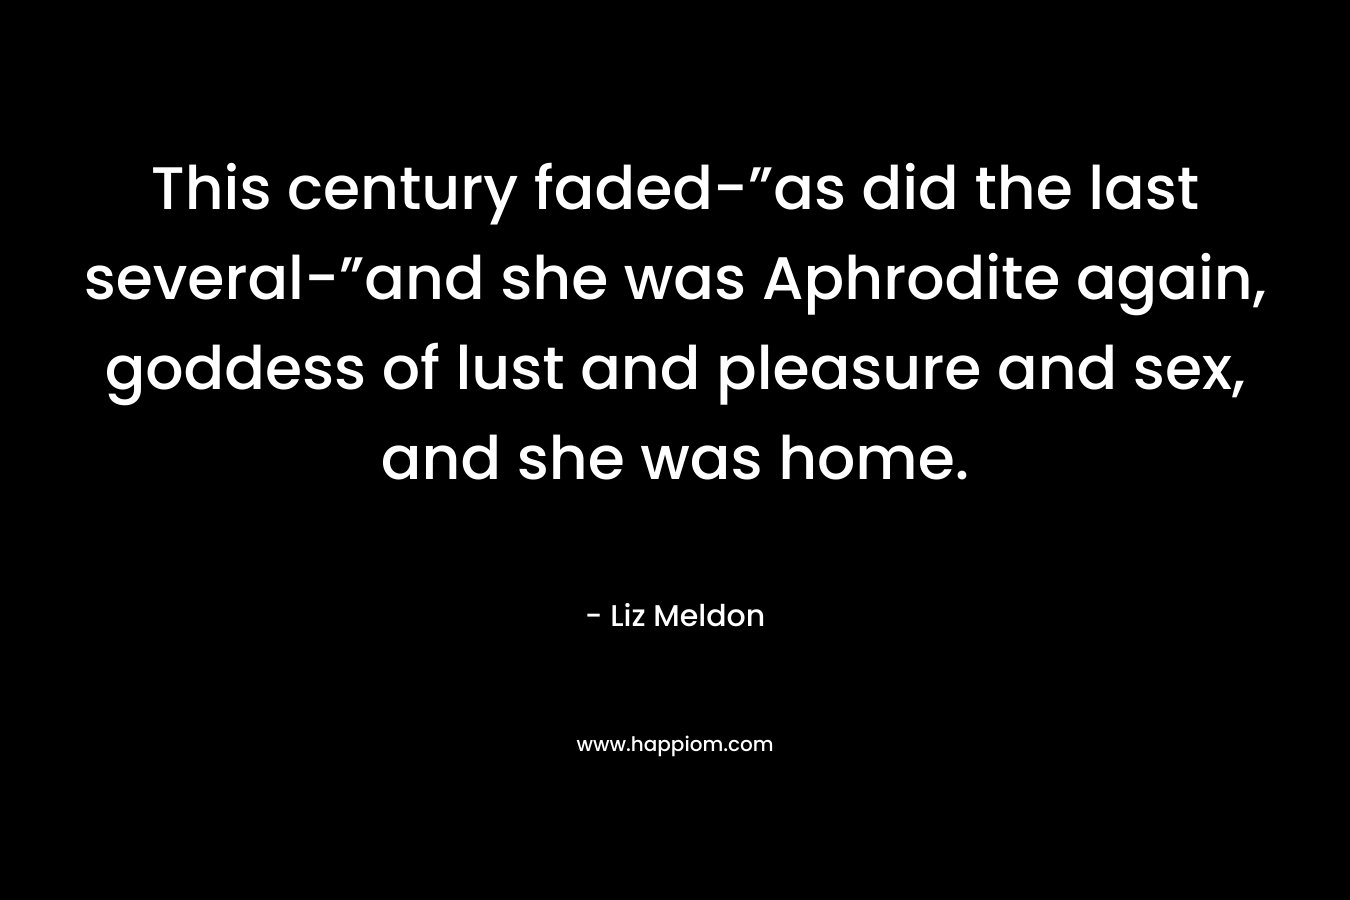 This century faded-”as did the last several-”and she was Aphrodite again, goddess of lust and pleasure and sex, and she was home. – Liz Meldon